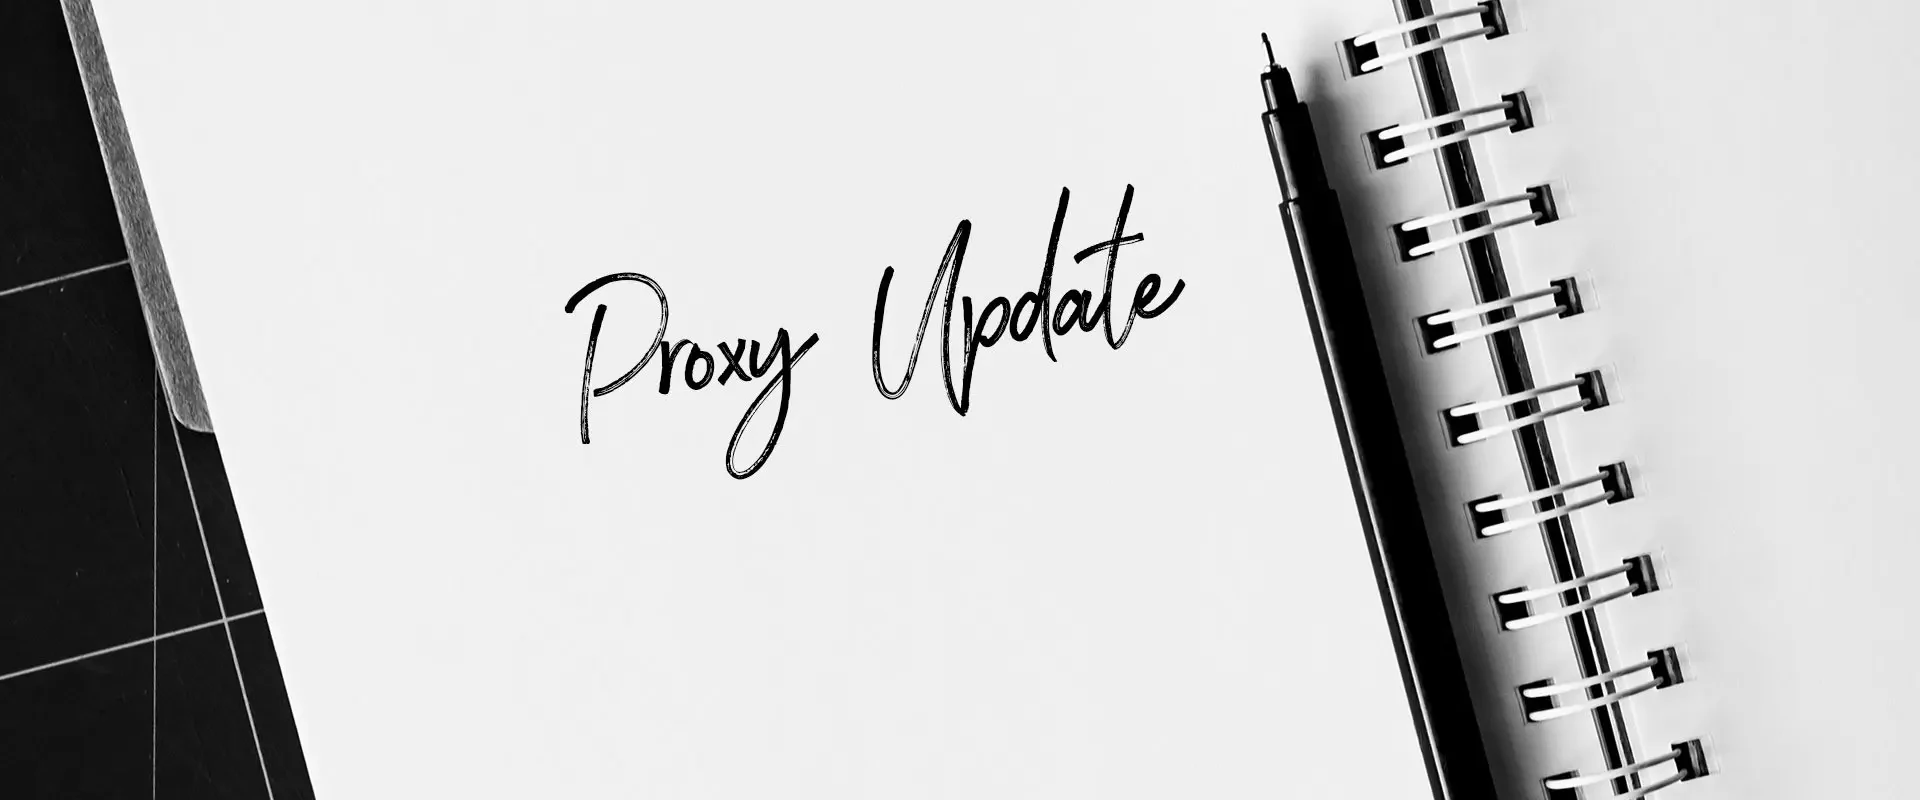 Proxy Update (US) Glass Lewis Benchmark Policy changes for 2023